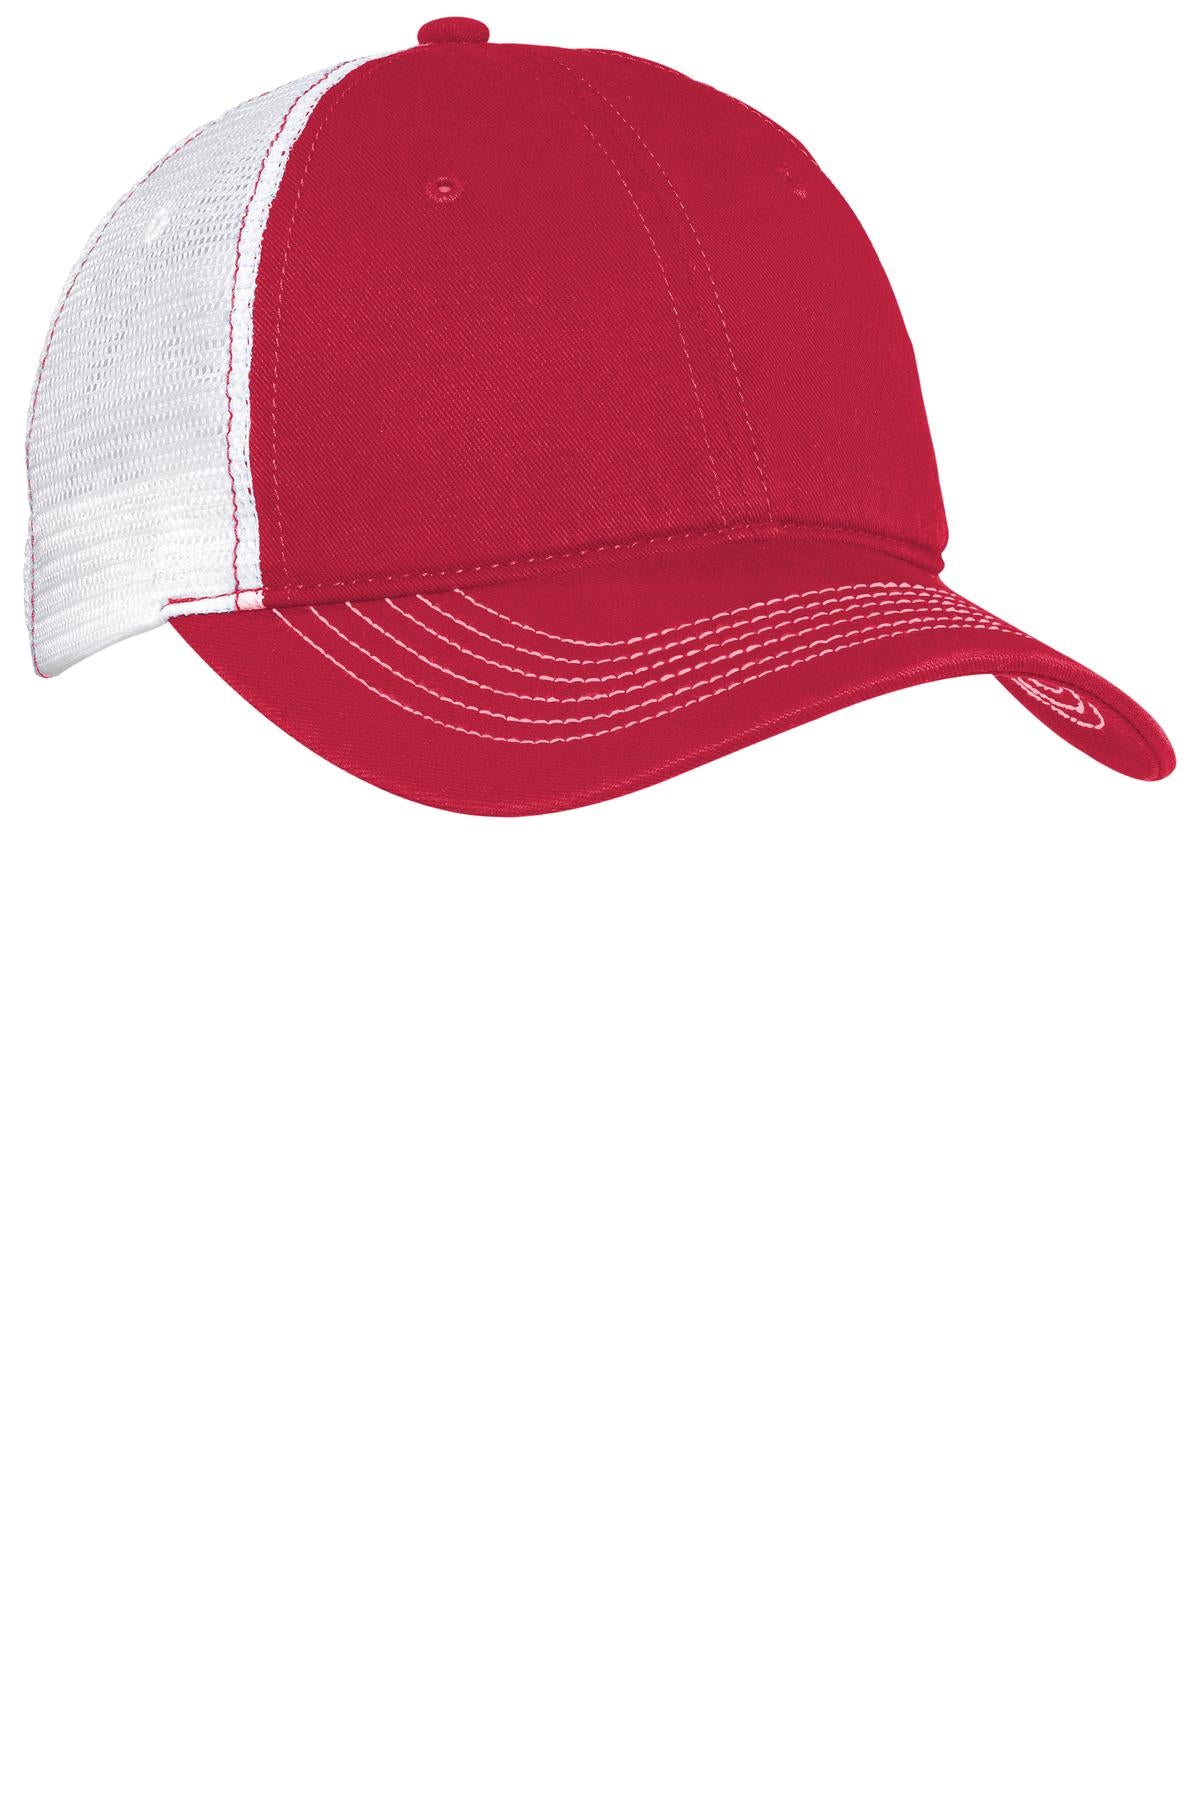 Caps Red/ White OSFA District